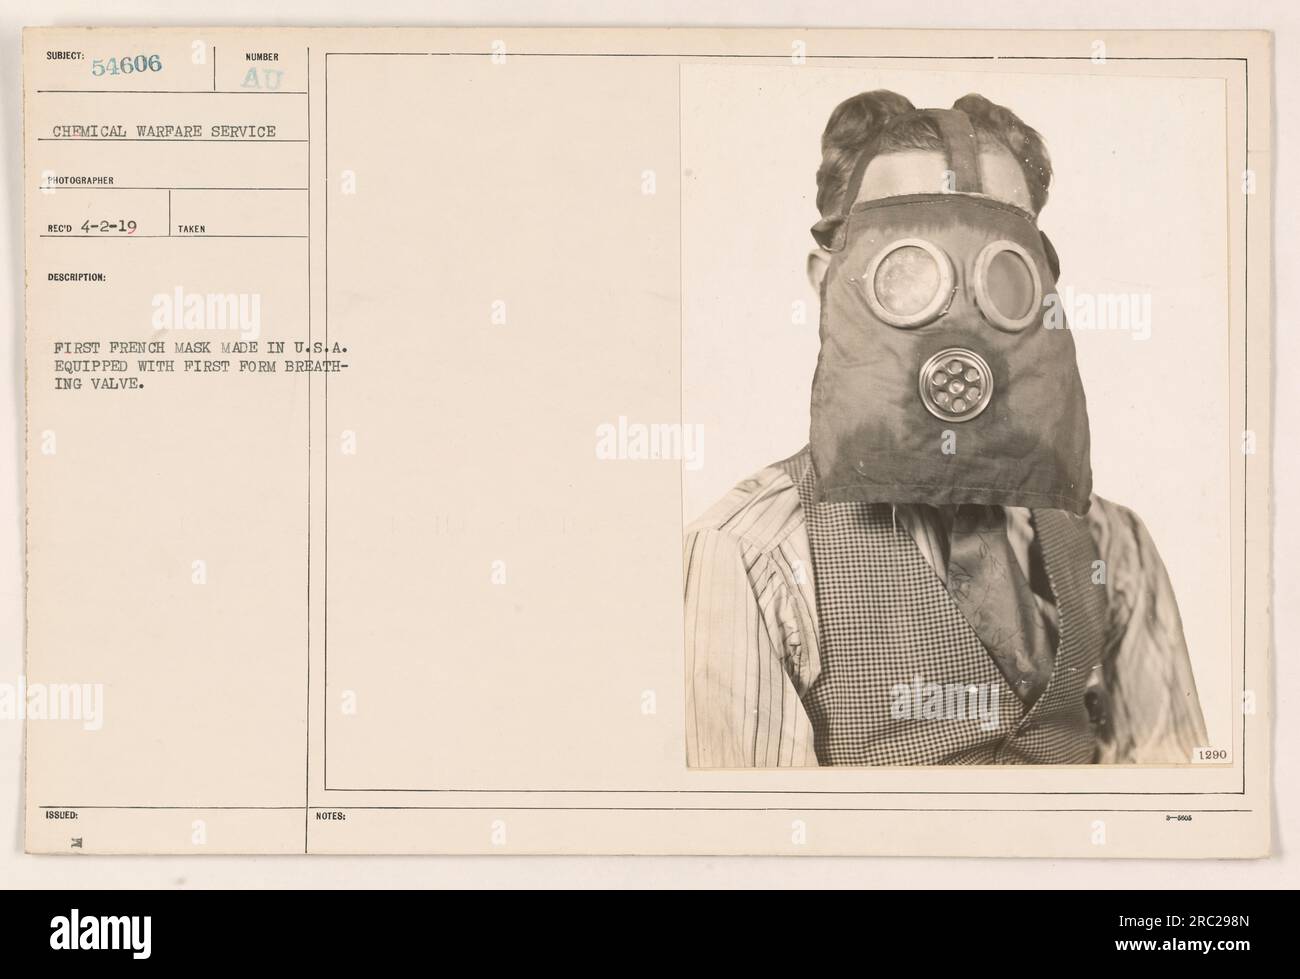 Image showing the first French gas mask manufactured in the United States equipped with the first iteration of a breathing valve. This development took place on April 2, 1919. The event was documented by a Chemical Warfare Service photographer under the subject number 54606. Stock Photo